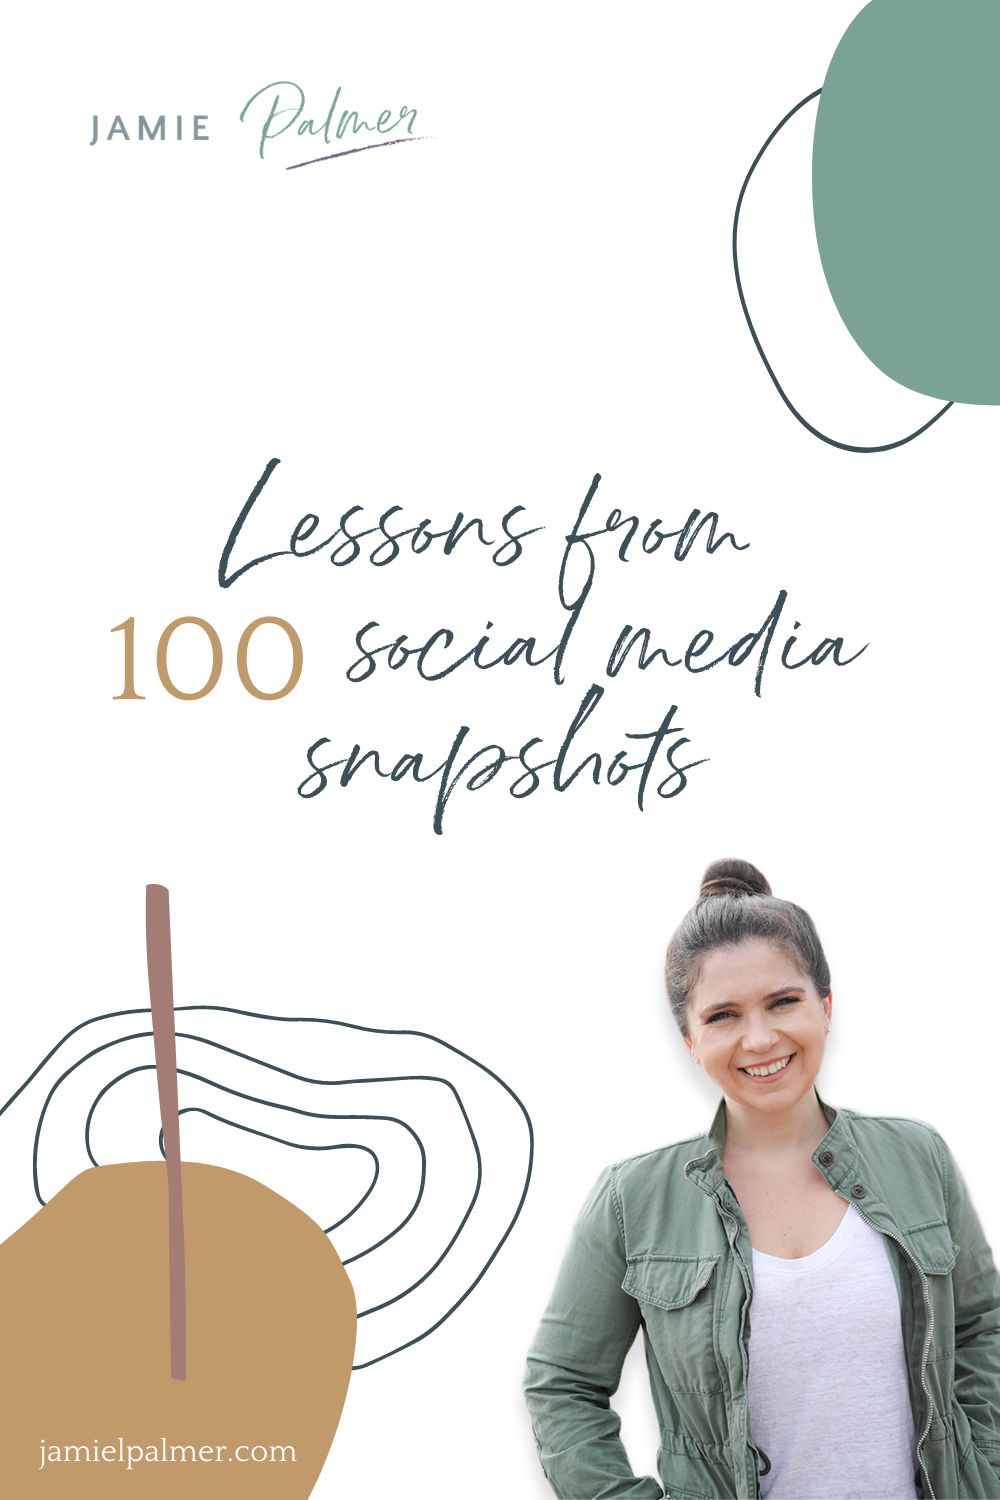 Lessons learned from 100 Social Media snapshots